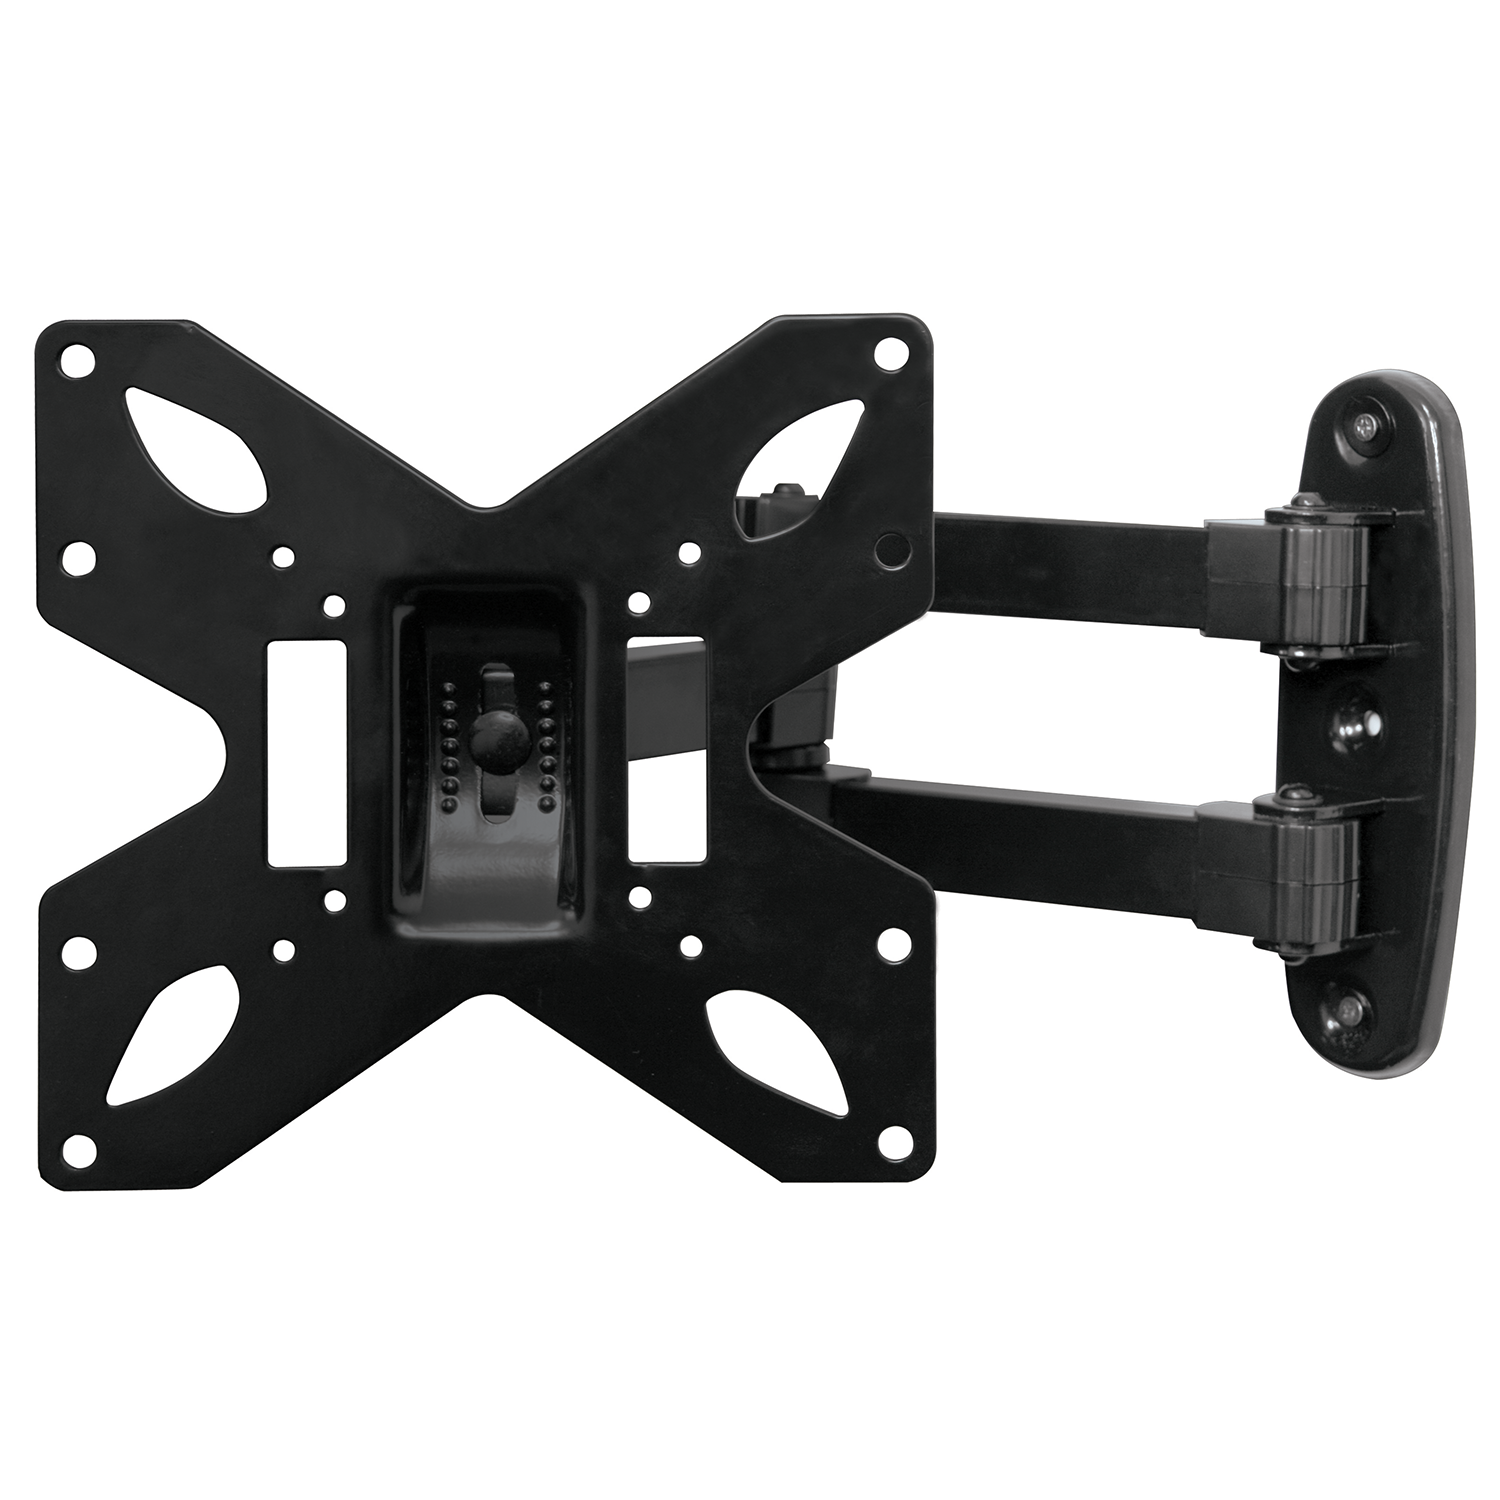 Full Motion TV Wall Mount - 17" to 47"